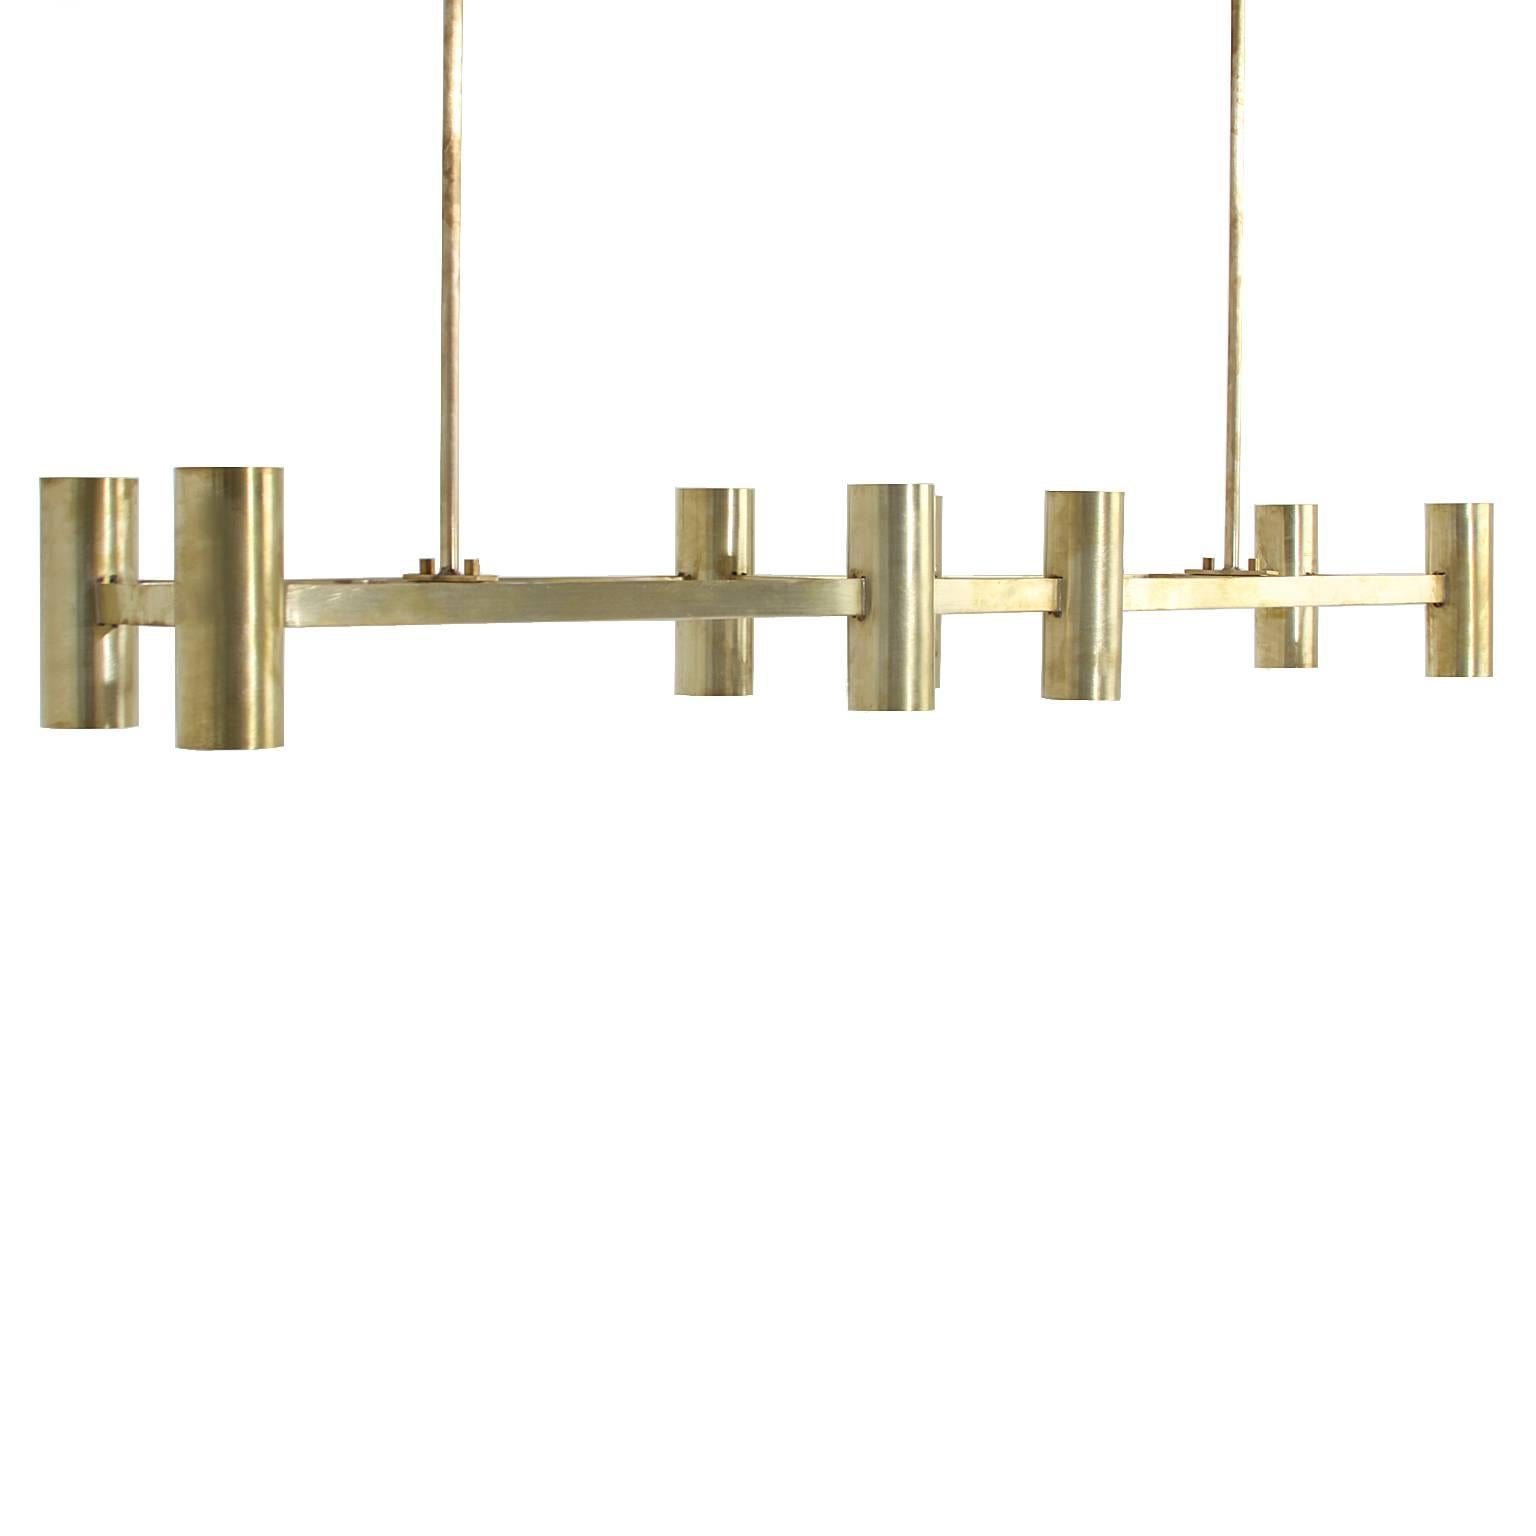 A large chandelier by Thomas Hayes Studio with 8 cylinders on a rectangular support in brushed finish in solid brass. The cylinders have both up lights and down lights, and the light makes the inside of the cylinders appear gold colored when lit.